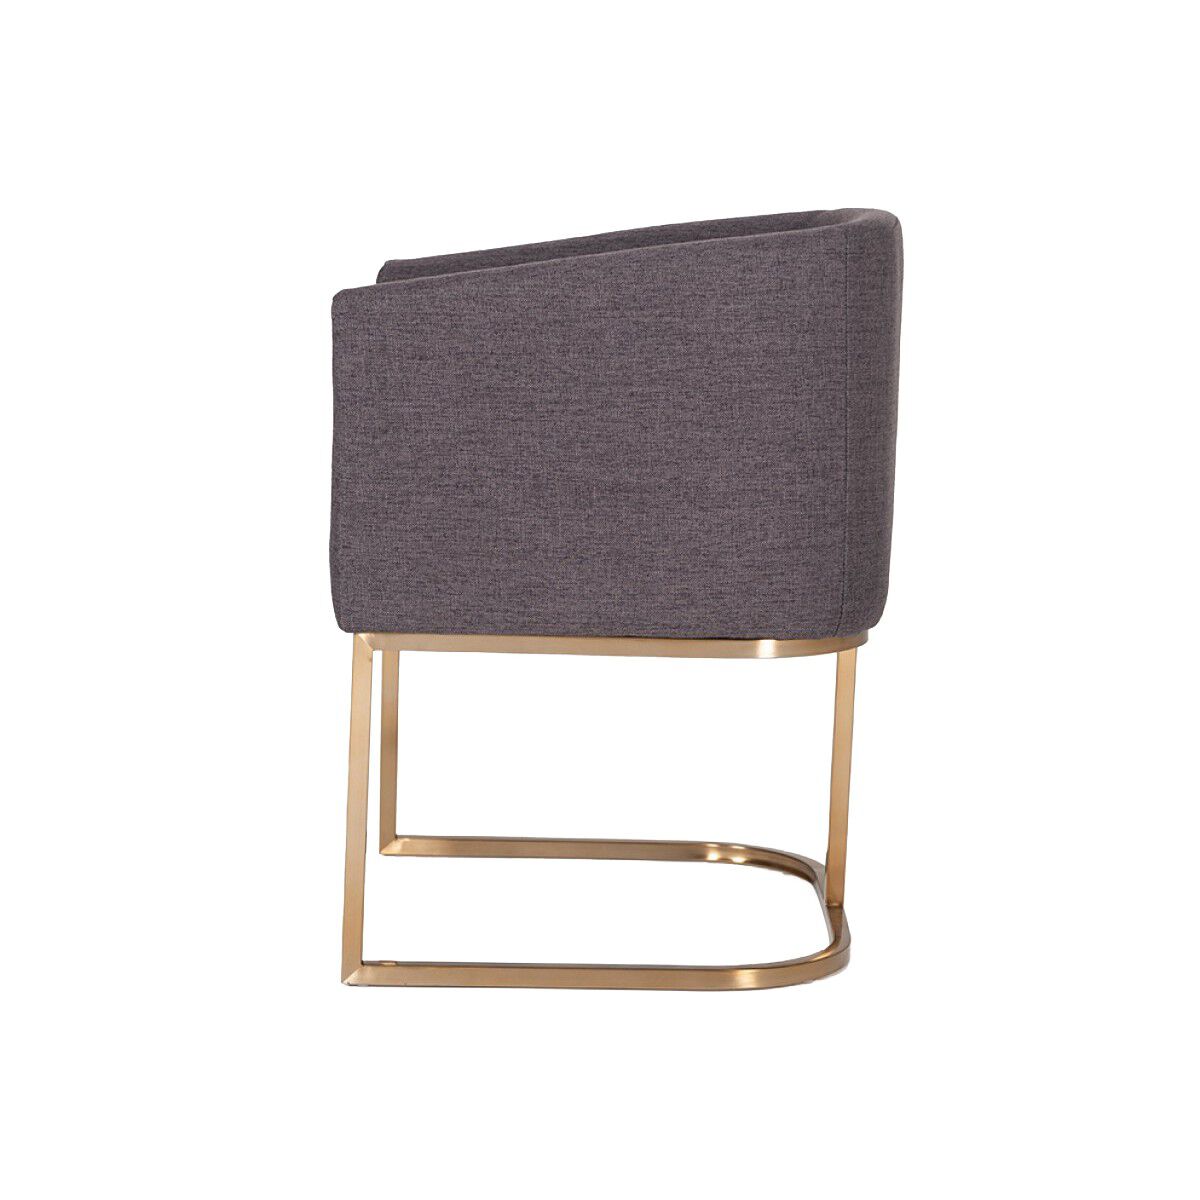 Fabric Upholstered Dining Chair with Round Cantilever Base, Gray